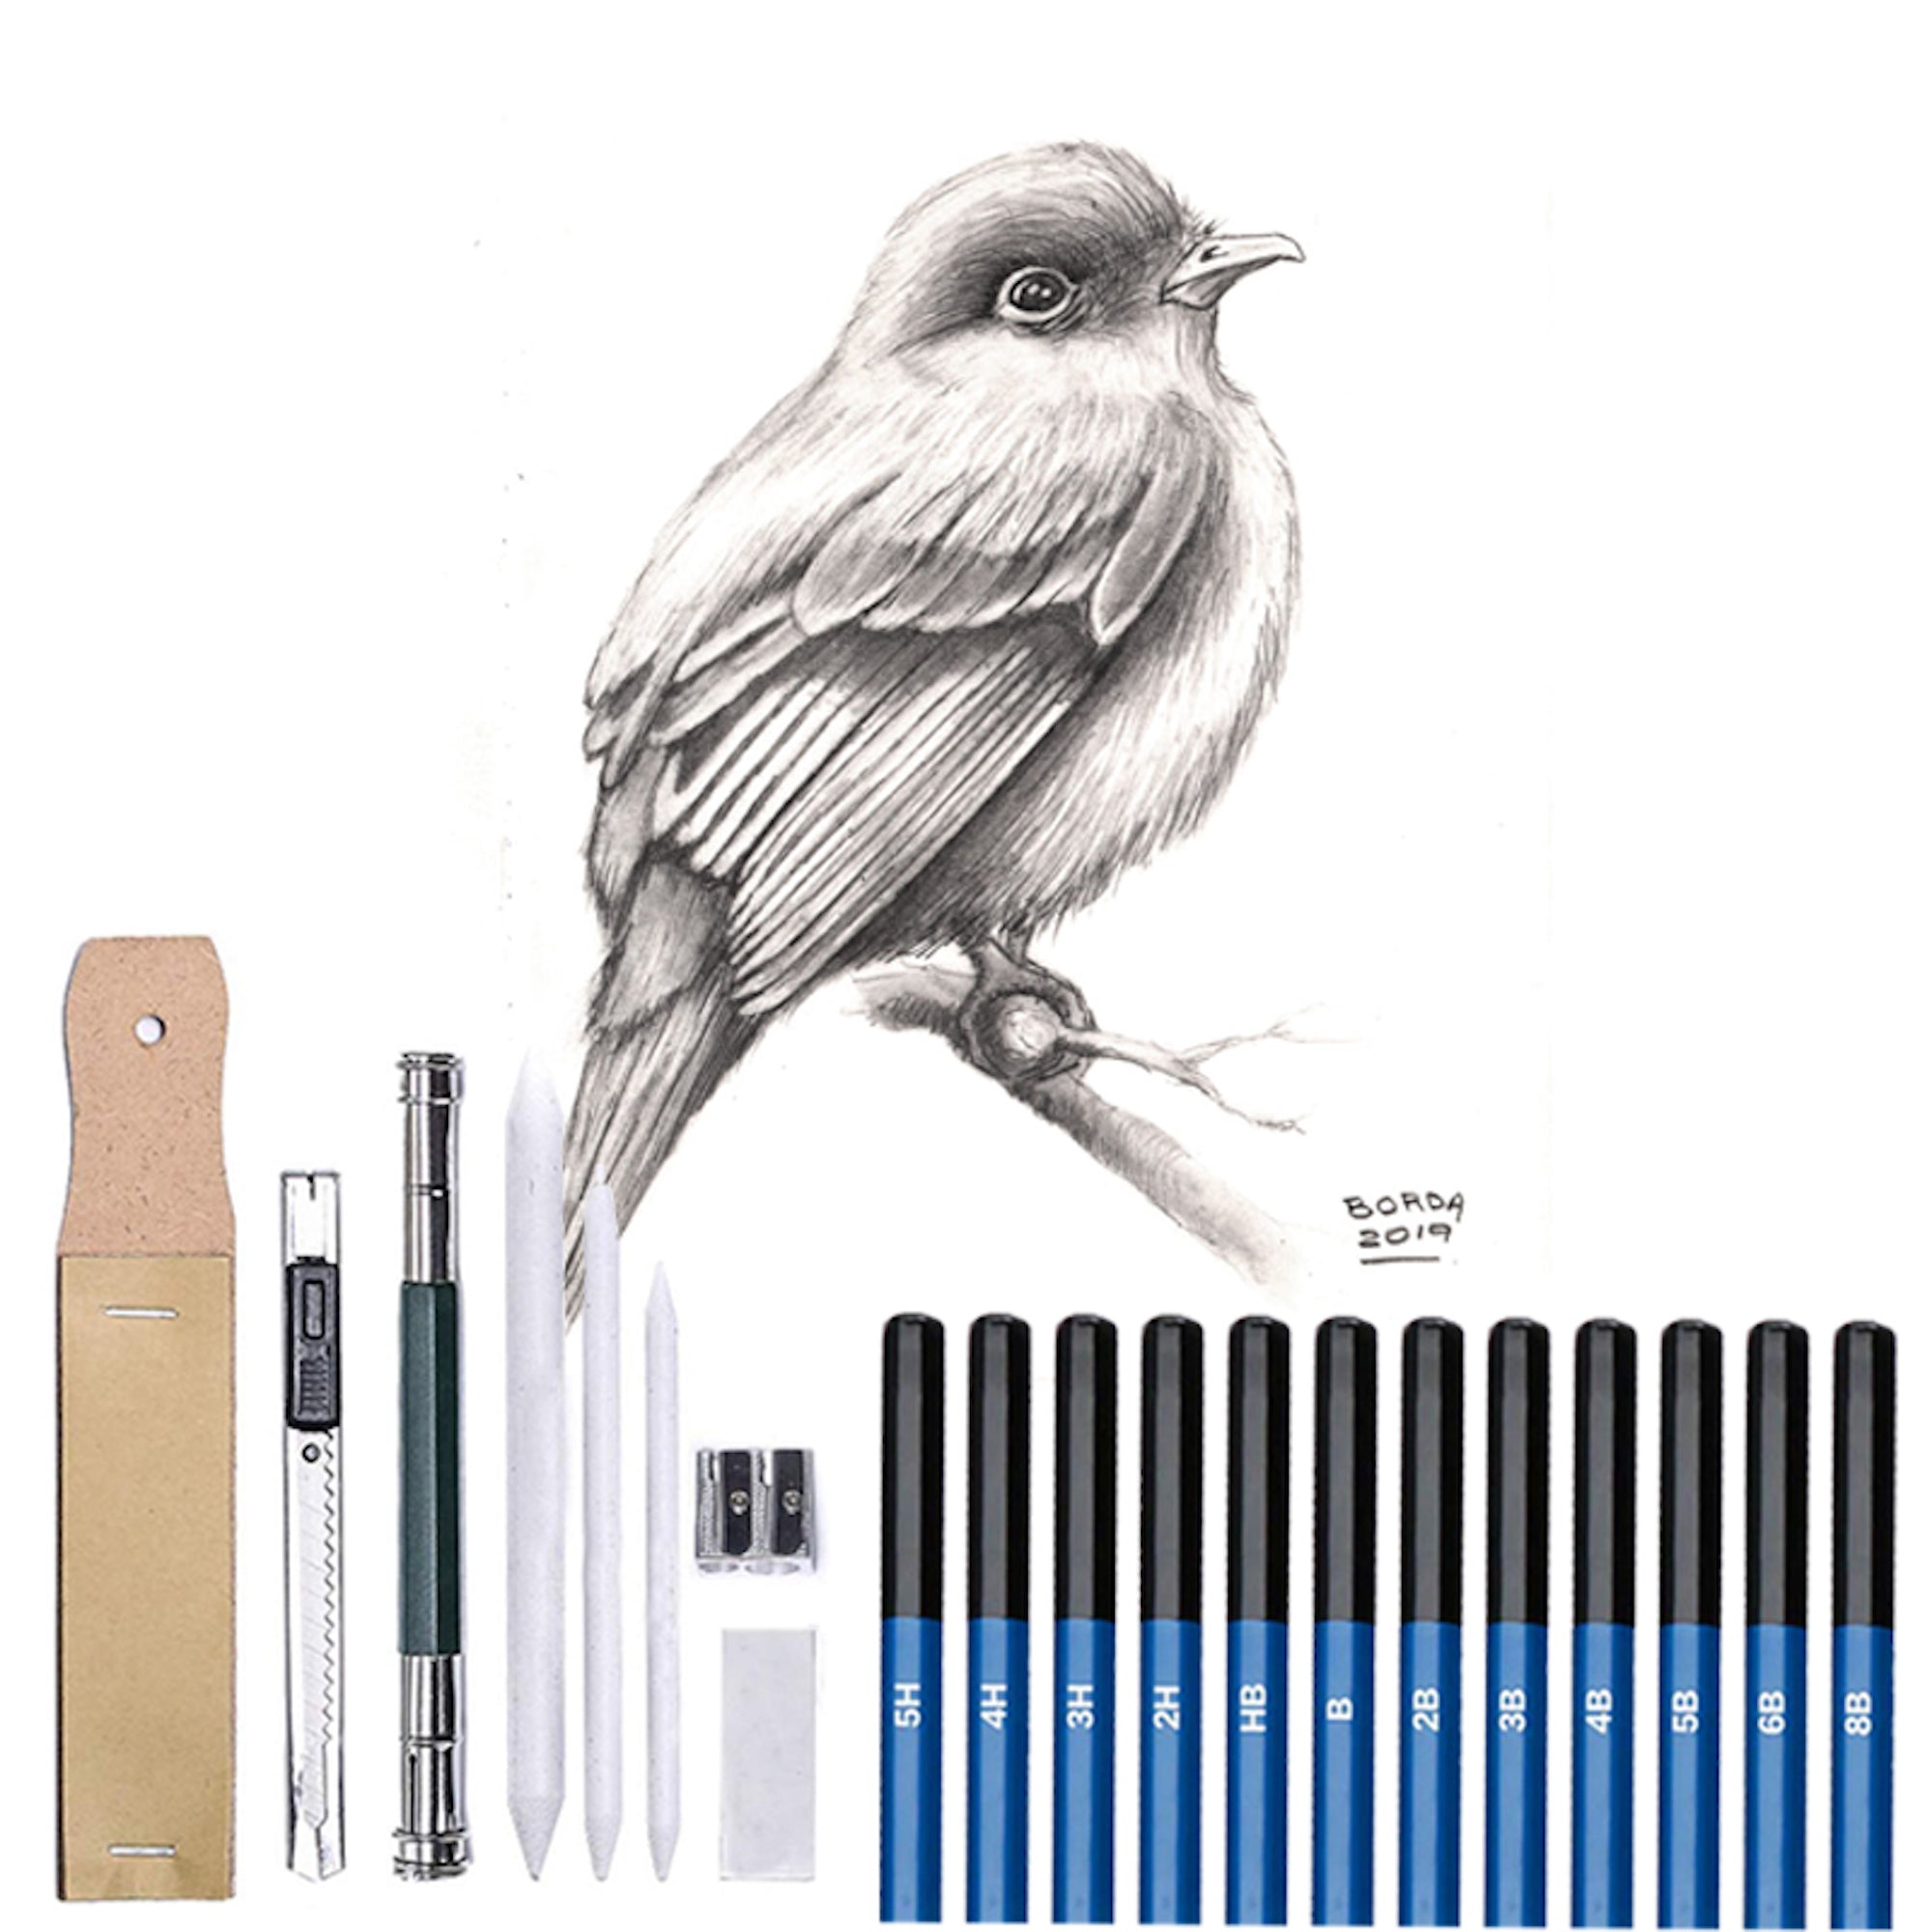 Leda Art Supply Premium Sketch Book (Medium 8.25 x 5.7 inch) for  Professional Ink, Pen, Graphite and Colored Pencil Drawing 